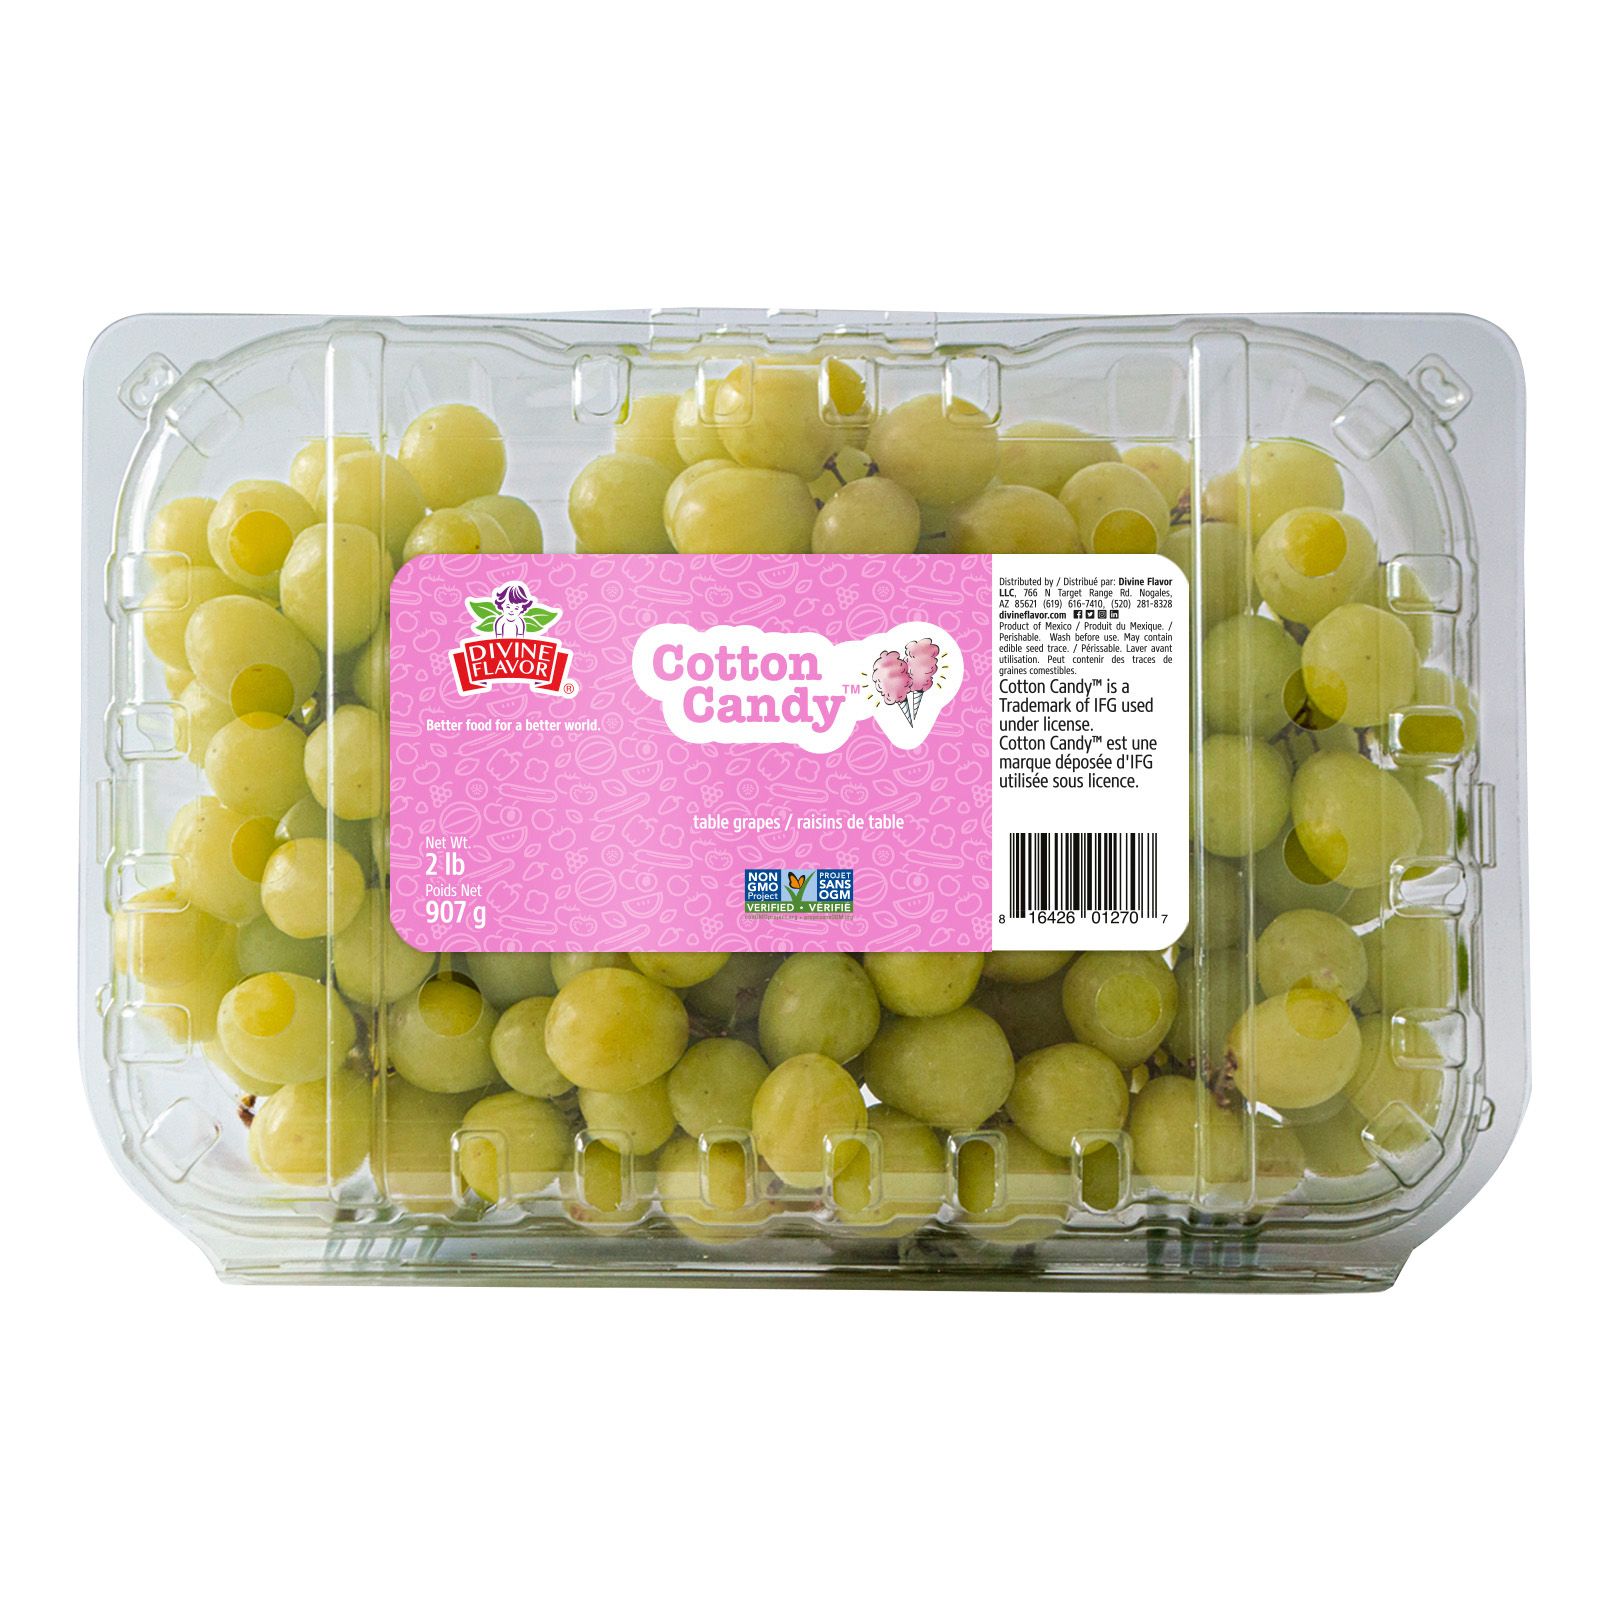 Cotton Candy Table Grapes, 2 lbs.